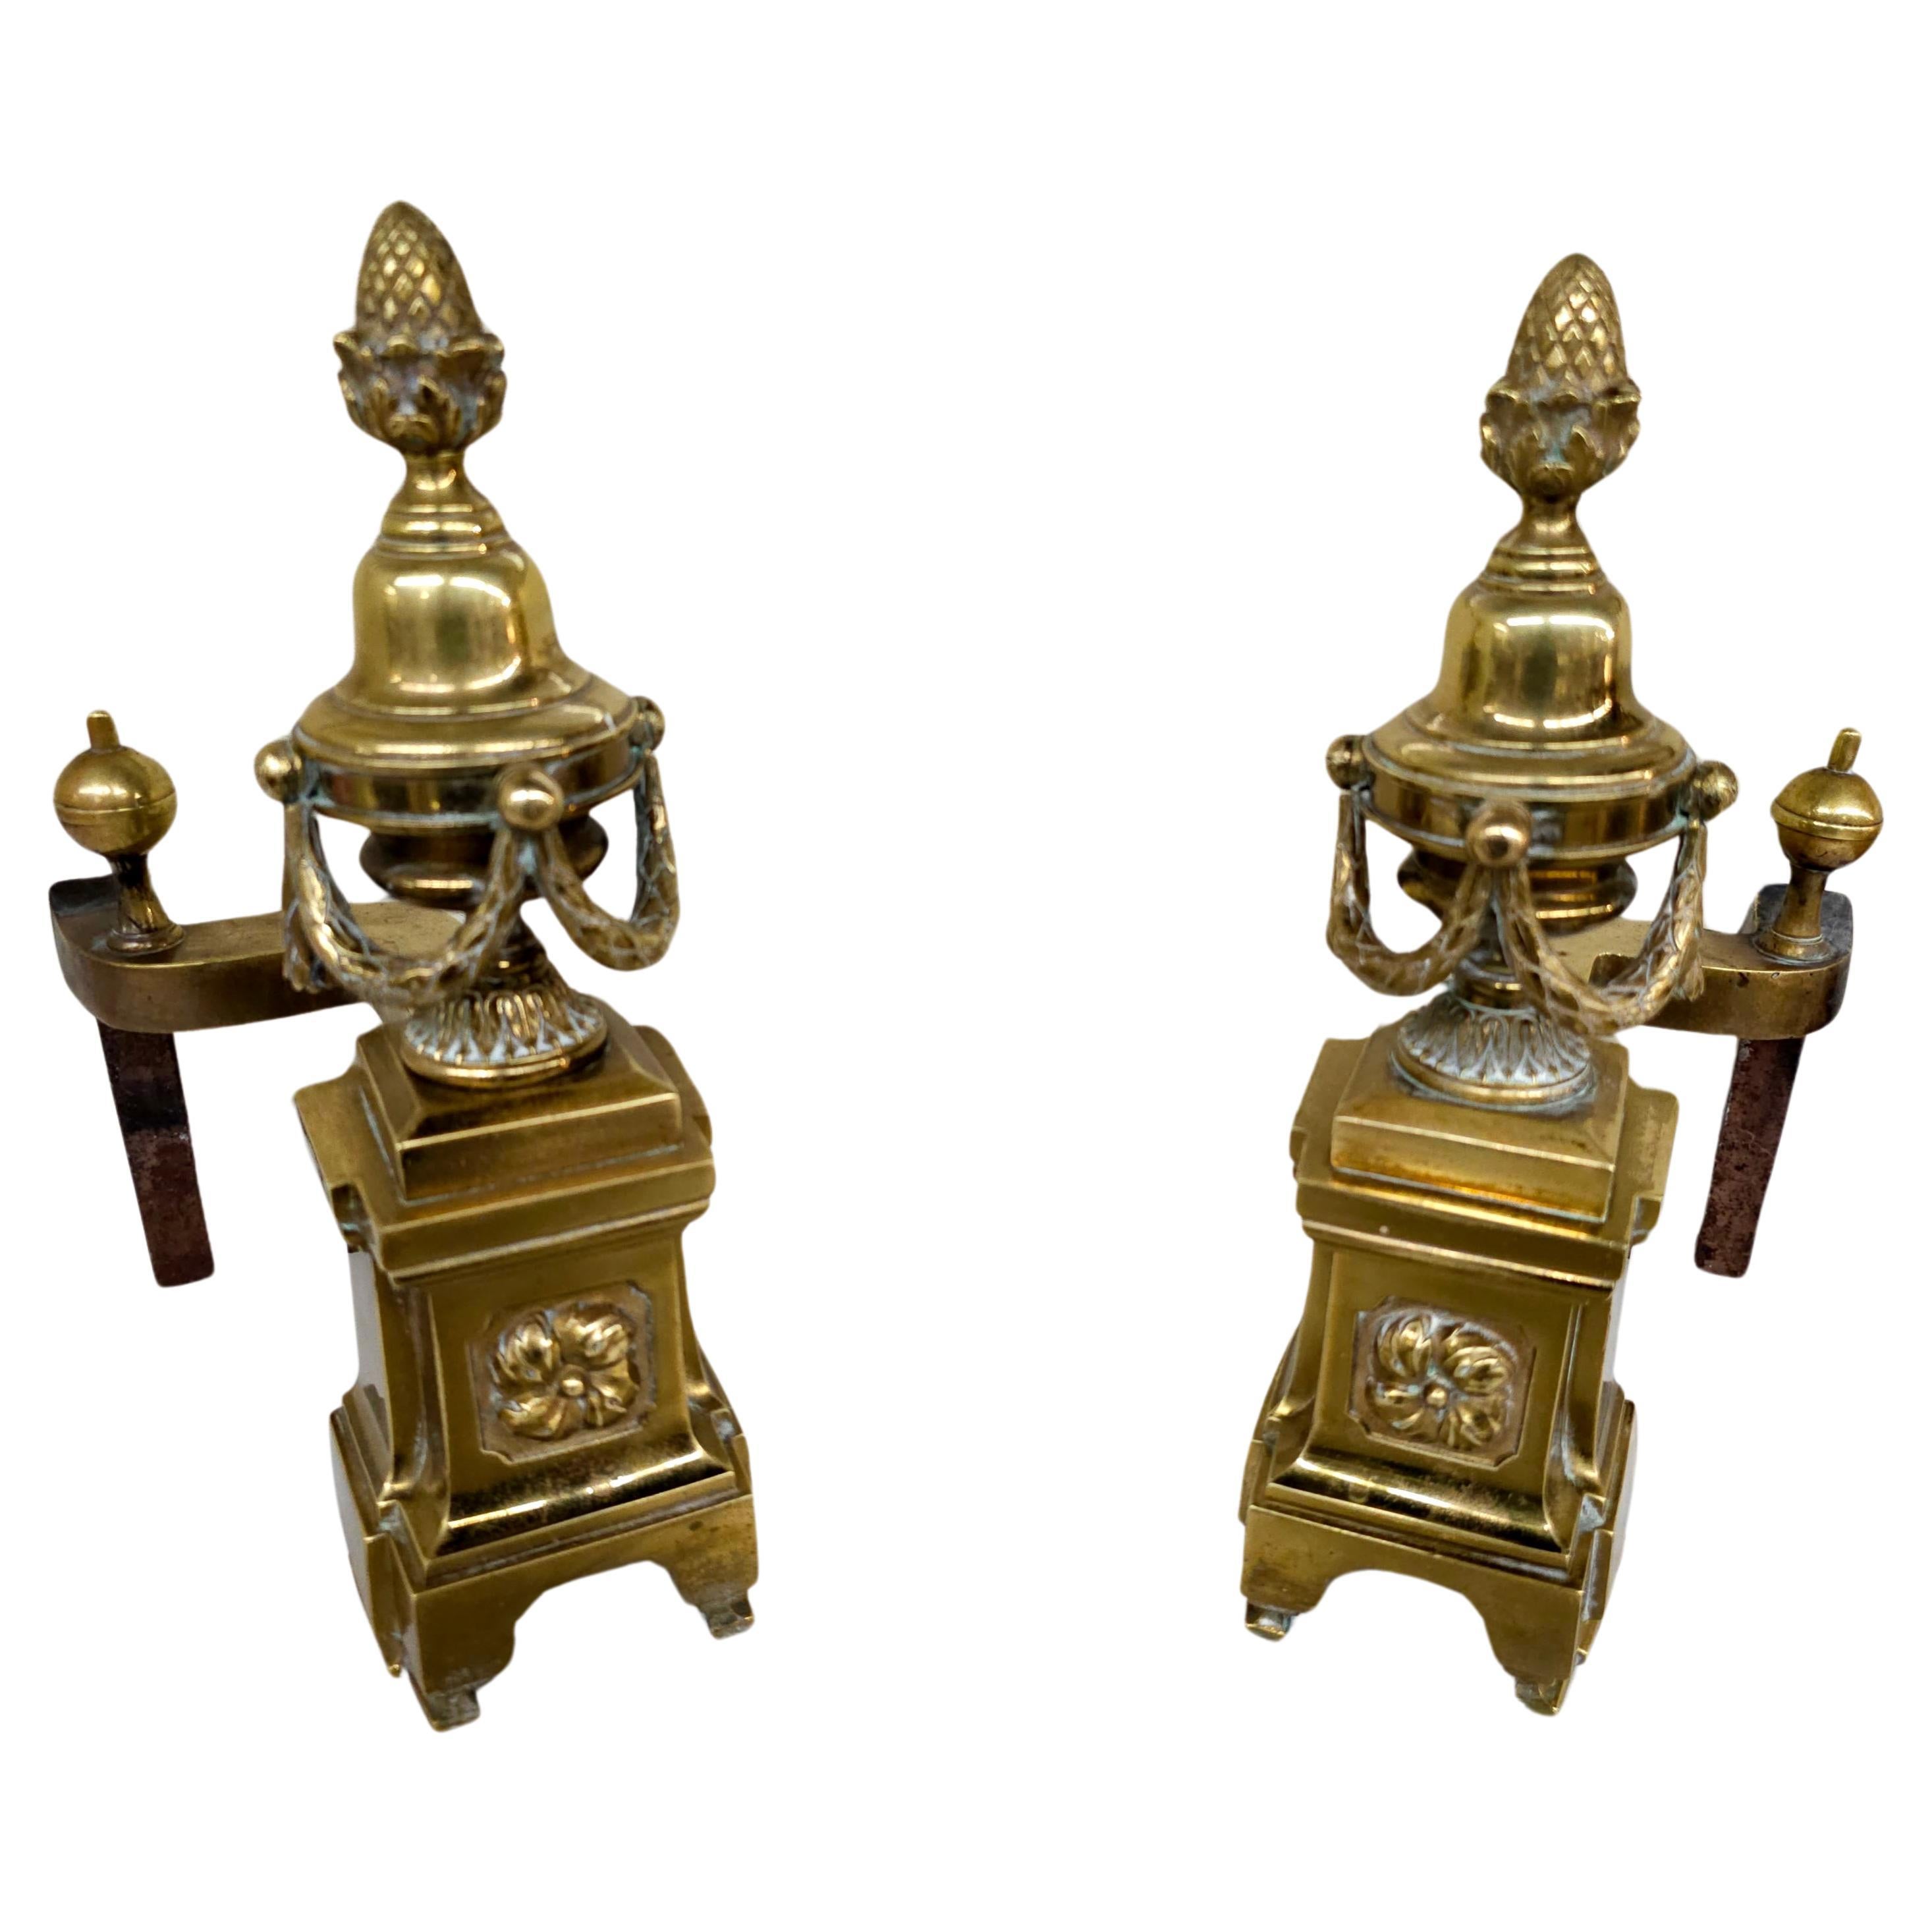 A Pair of French Empire Louis XV Style Acorn and Swag Brass Andirons. Measure 5